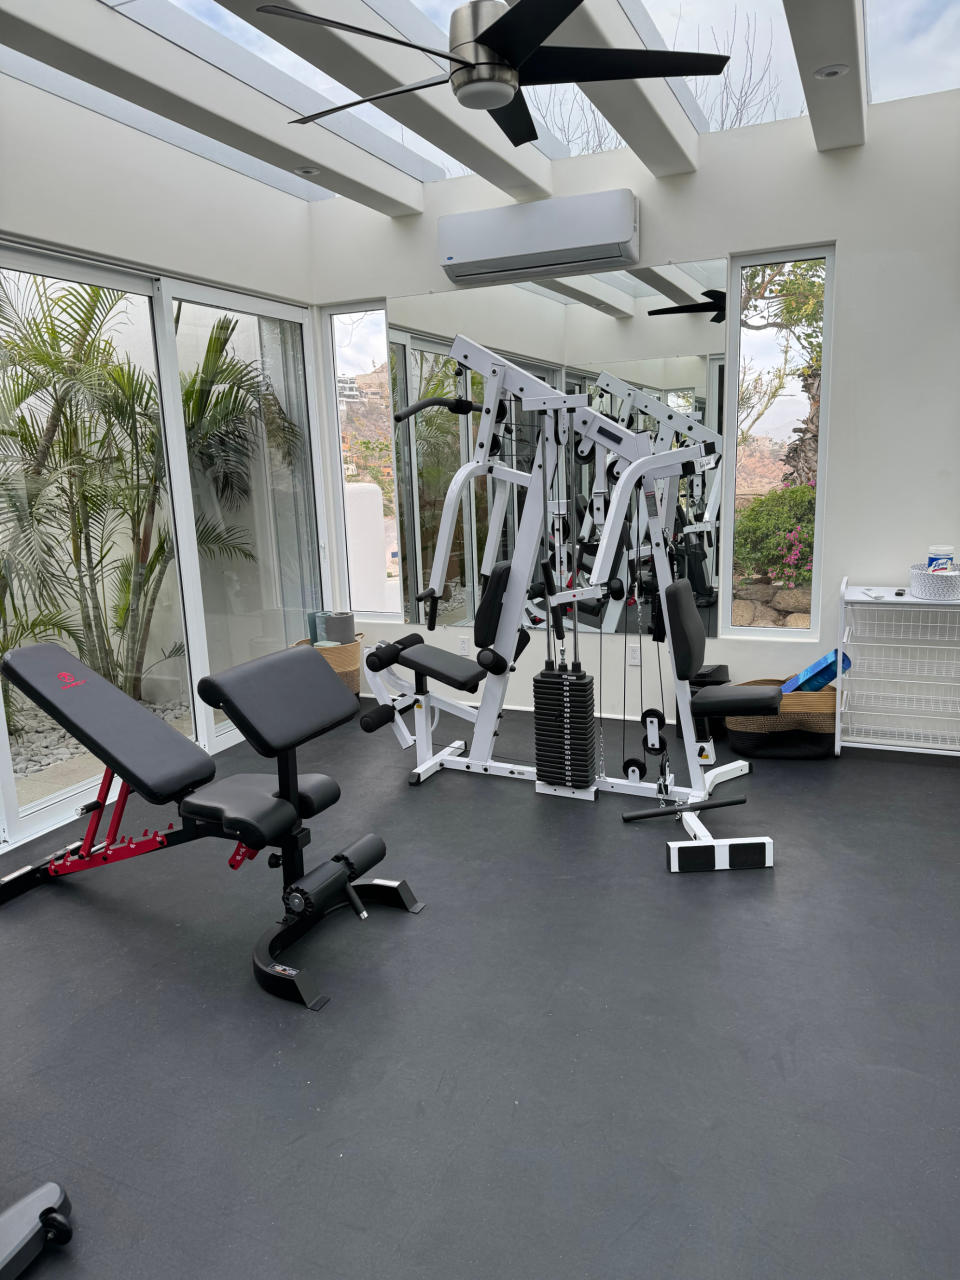 Home gym with weight machines, benches, and a mirrored wall, surrounded by glass windows overlooking outdoor greenery